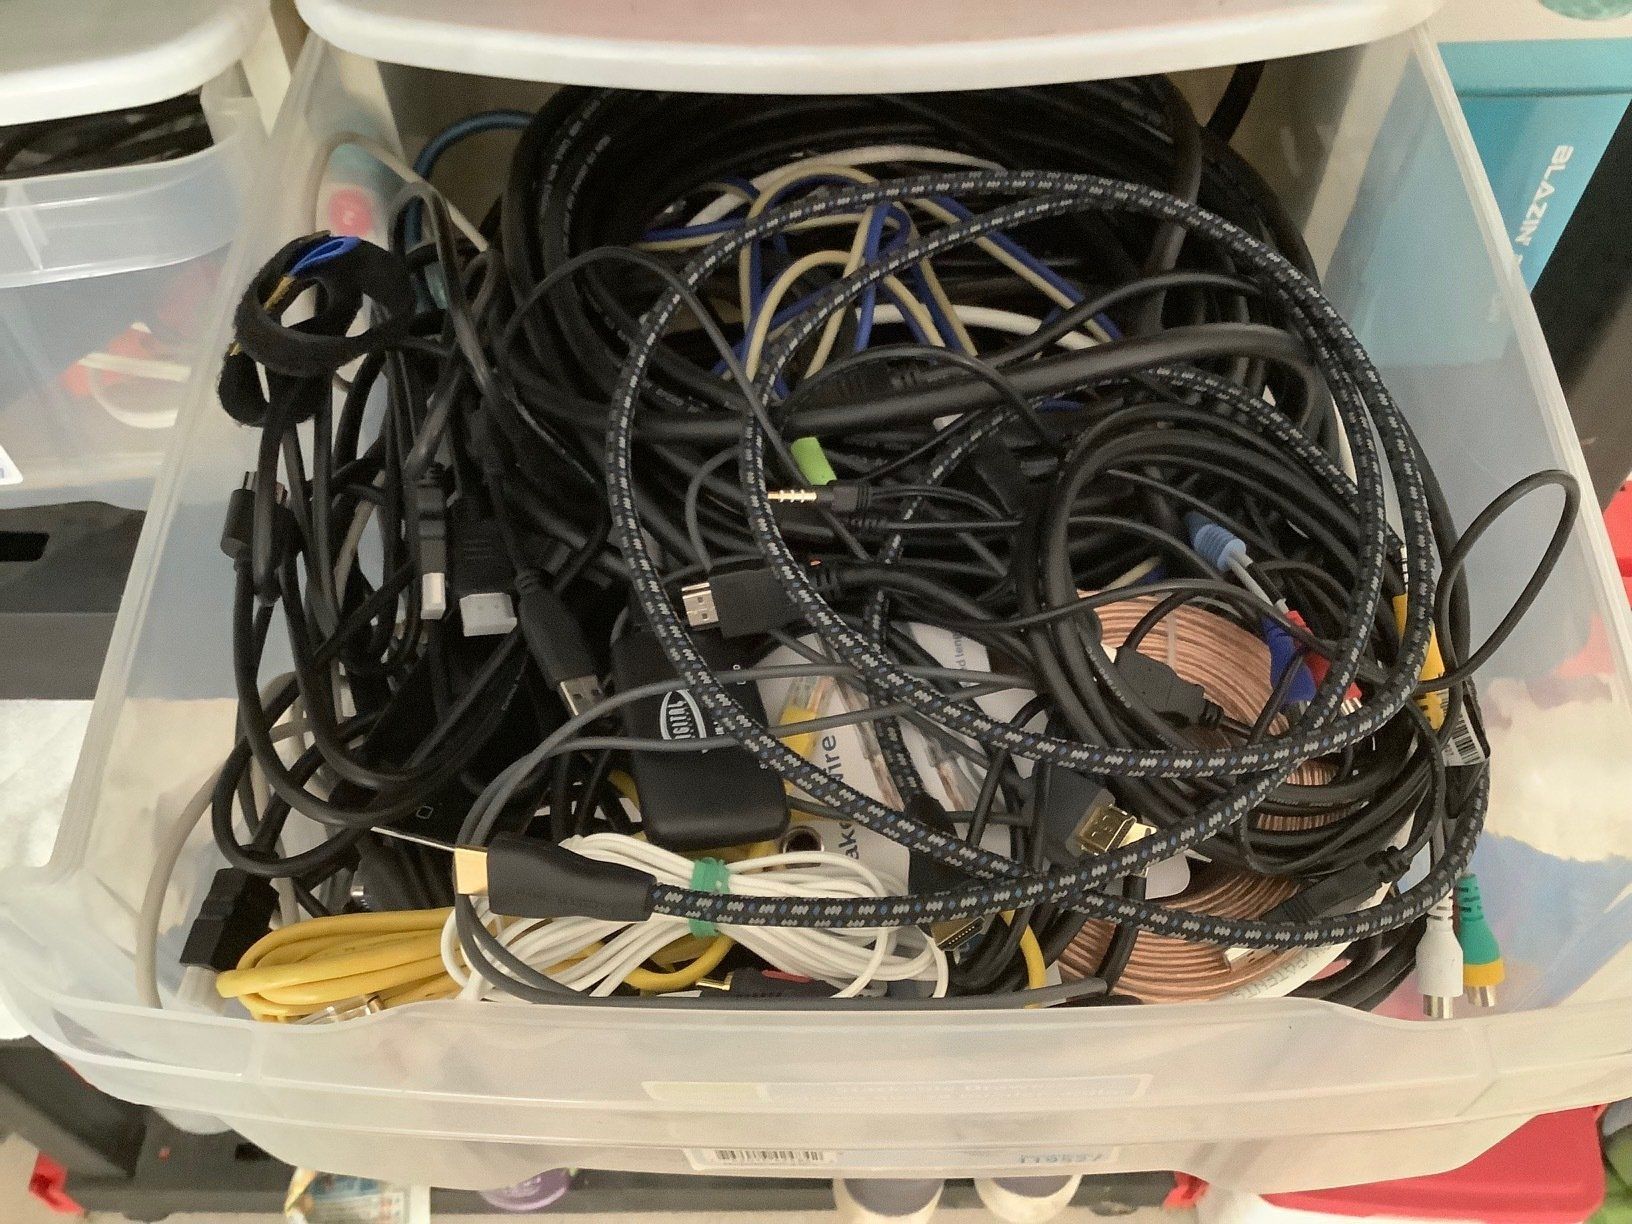 Box of messy wires